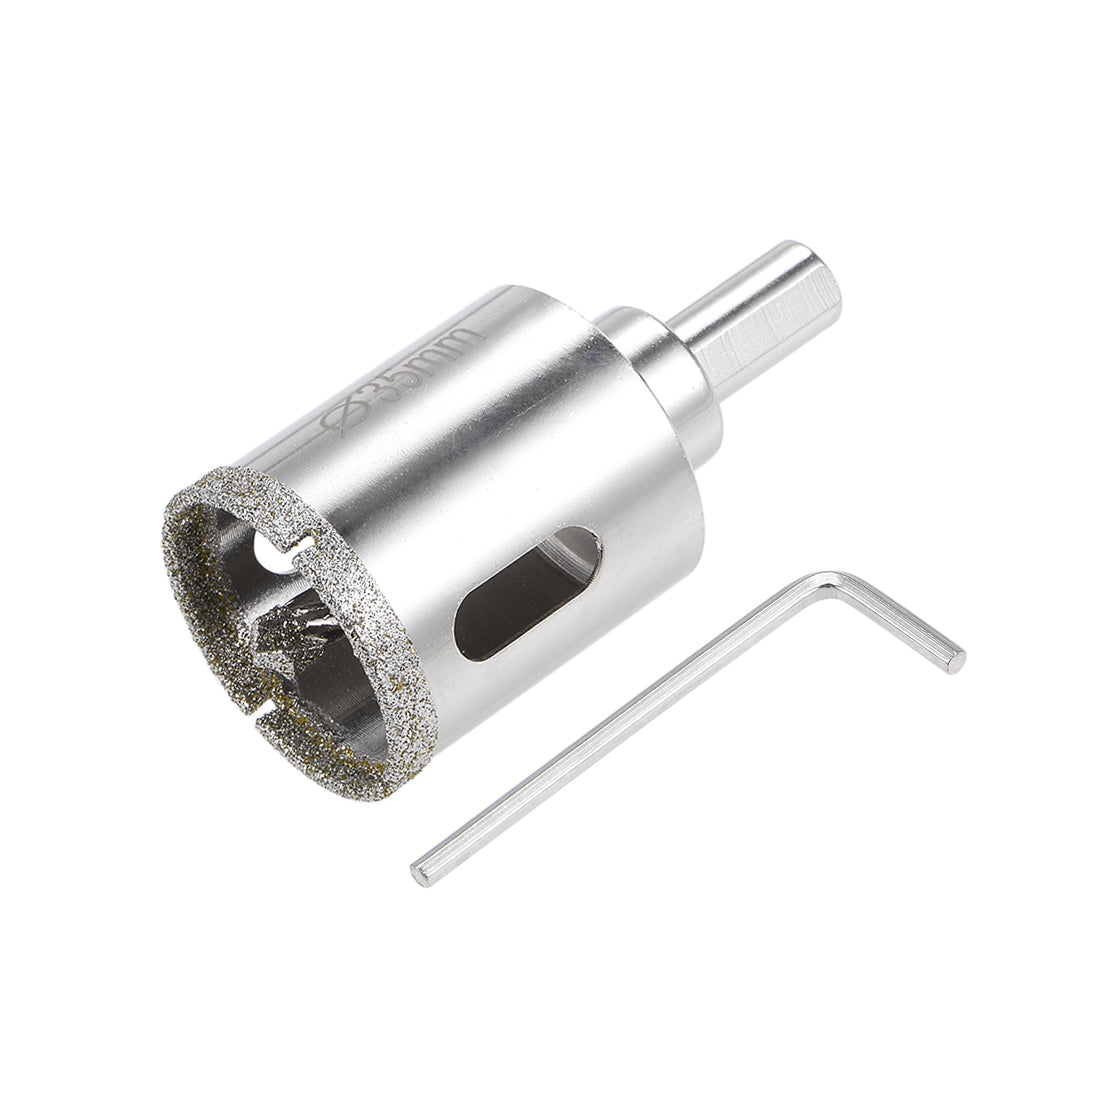 uxcell Uxcell Diamond Drill Bit Glass Hole Saw with Center Pilot Bit for Porcelain Tile